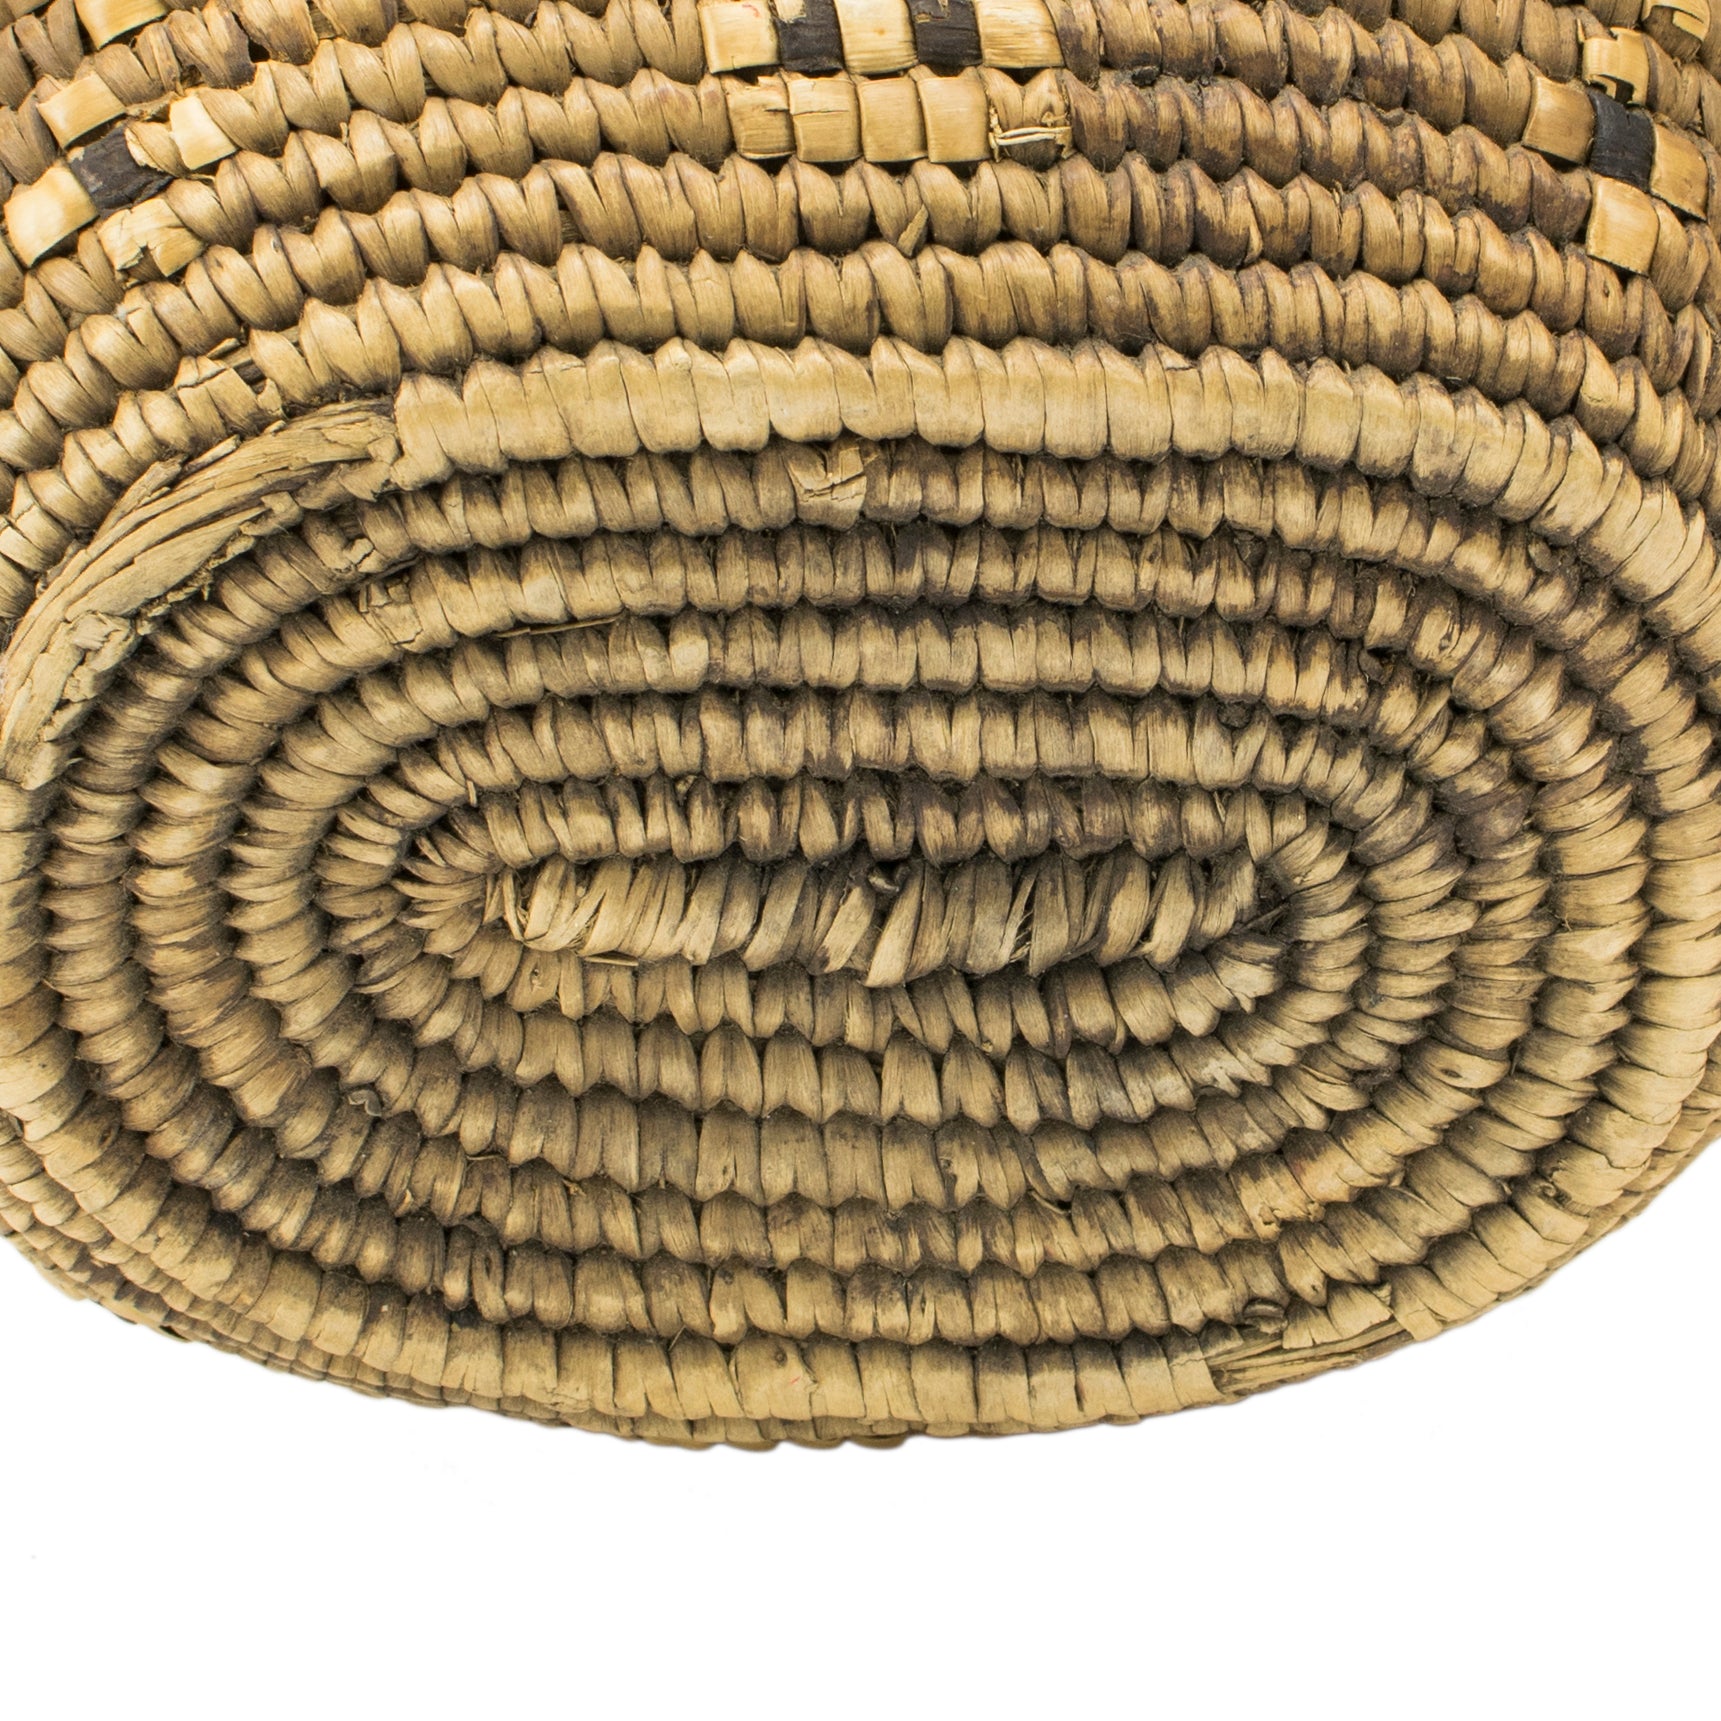 Klickitat Basket with Ascending Stair Pattern